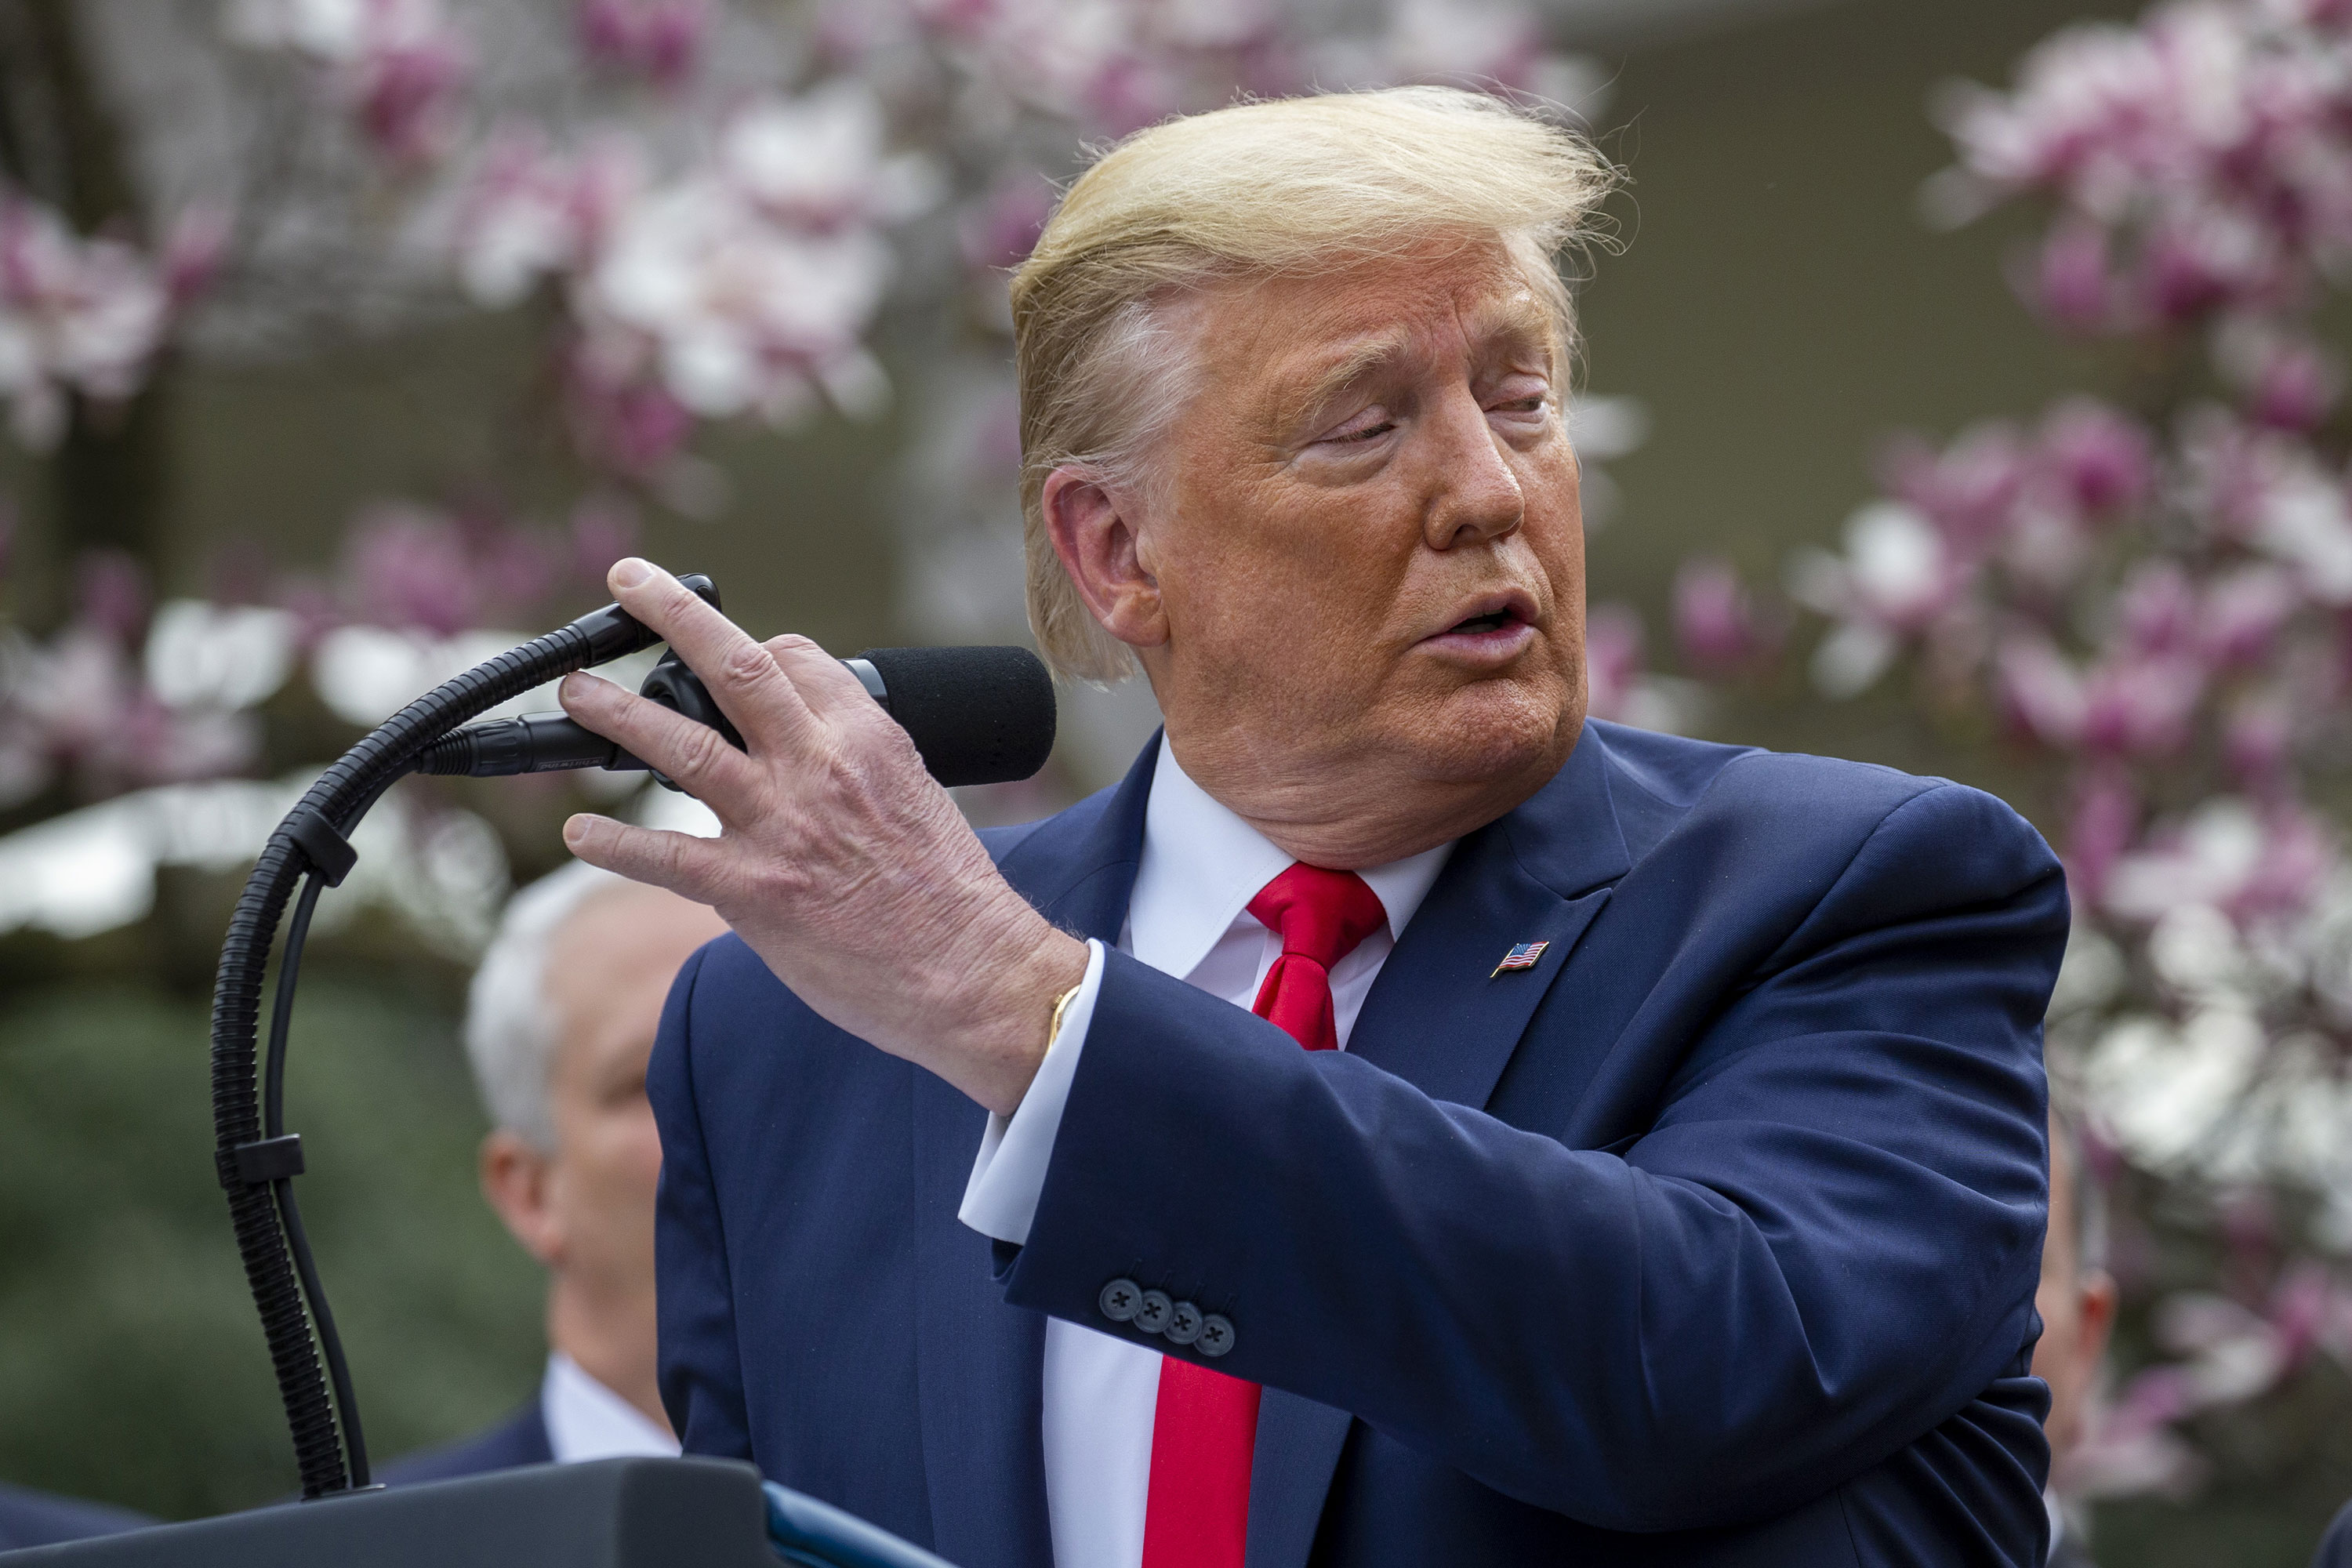 President Donald Trump touches the microphone while speaking at a news conference about Coronavirus in the Rose Garden of the White House on Friday, March 13.